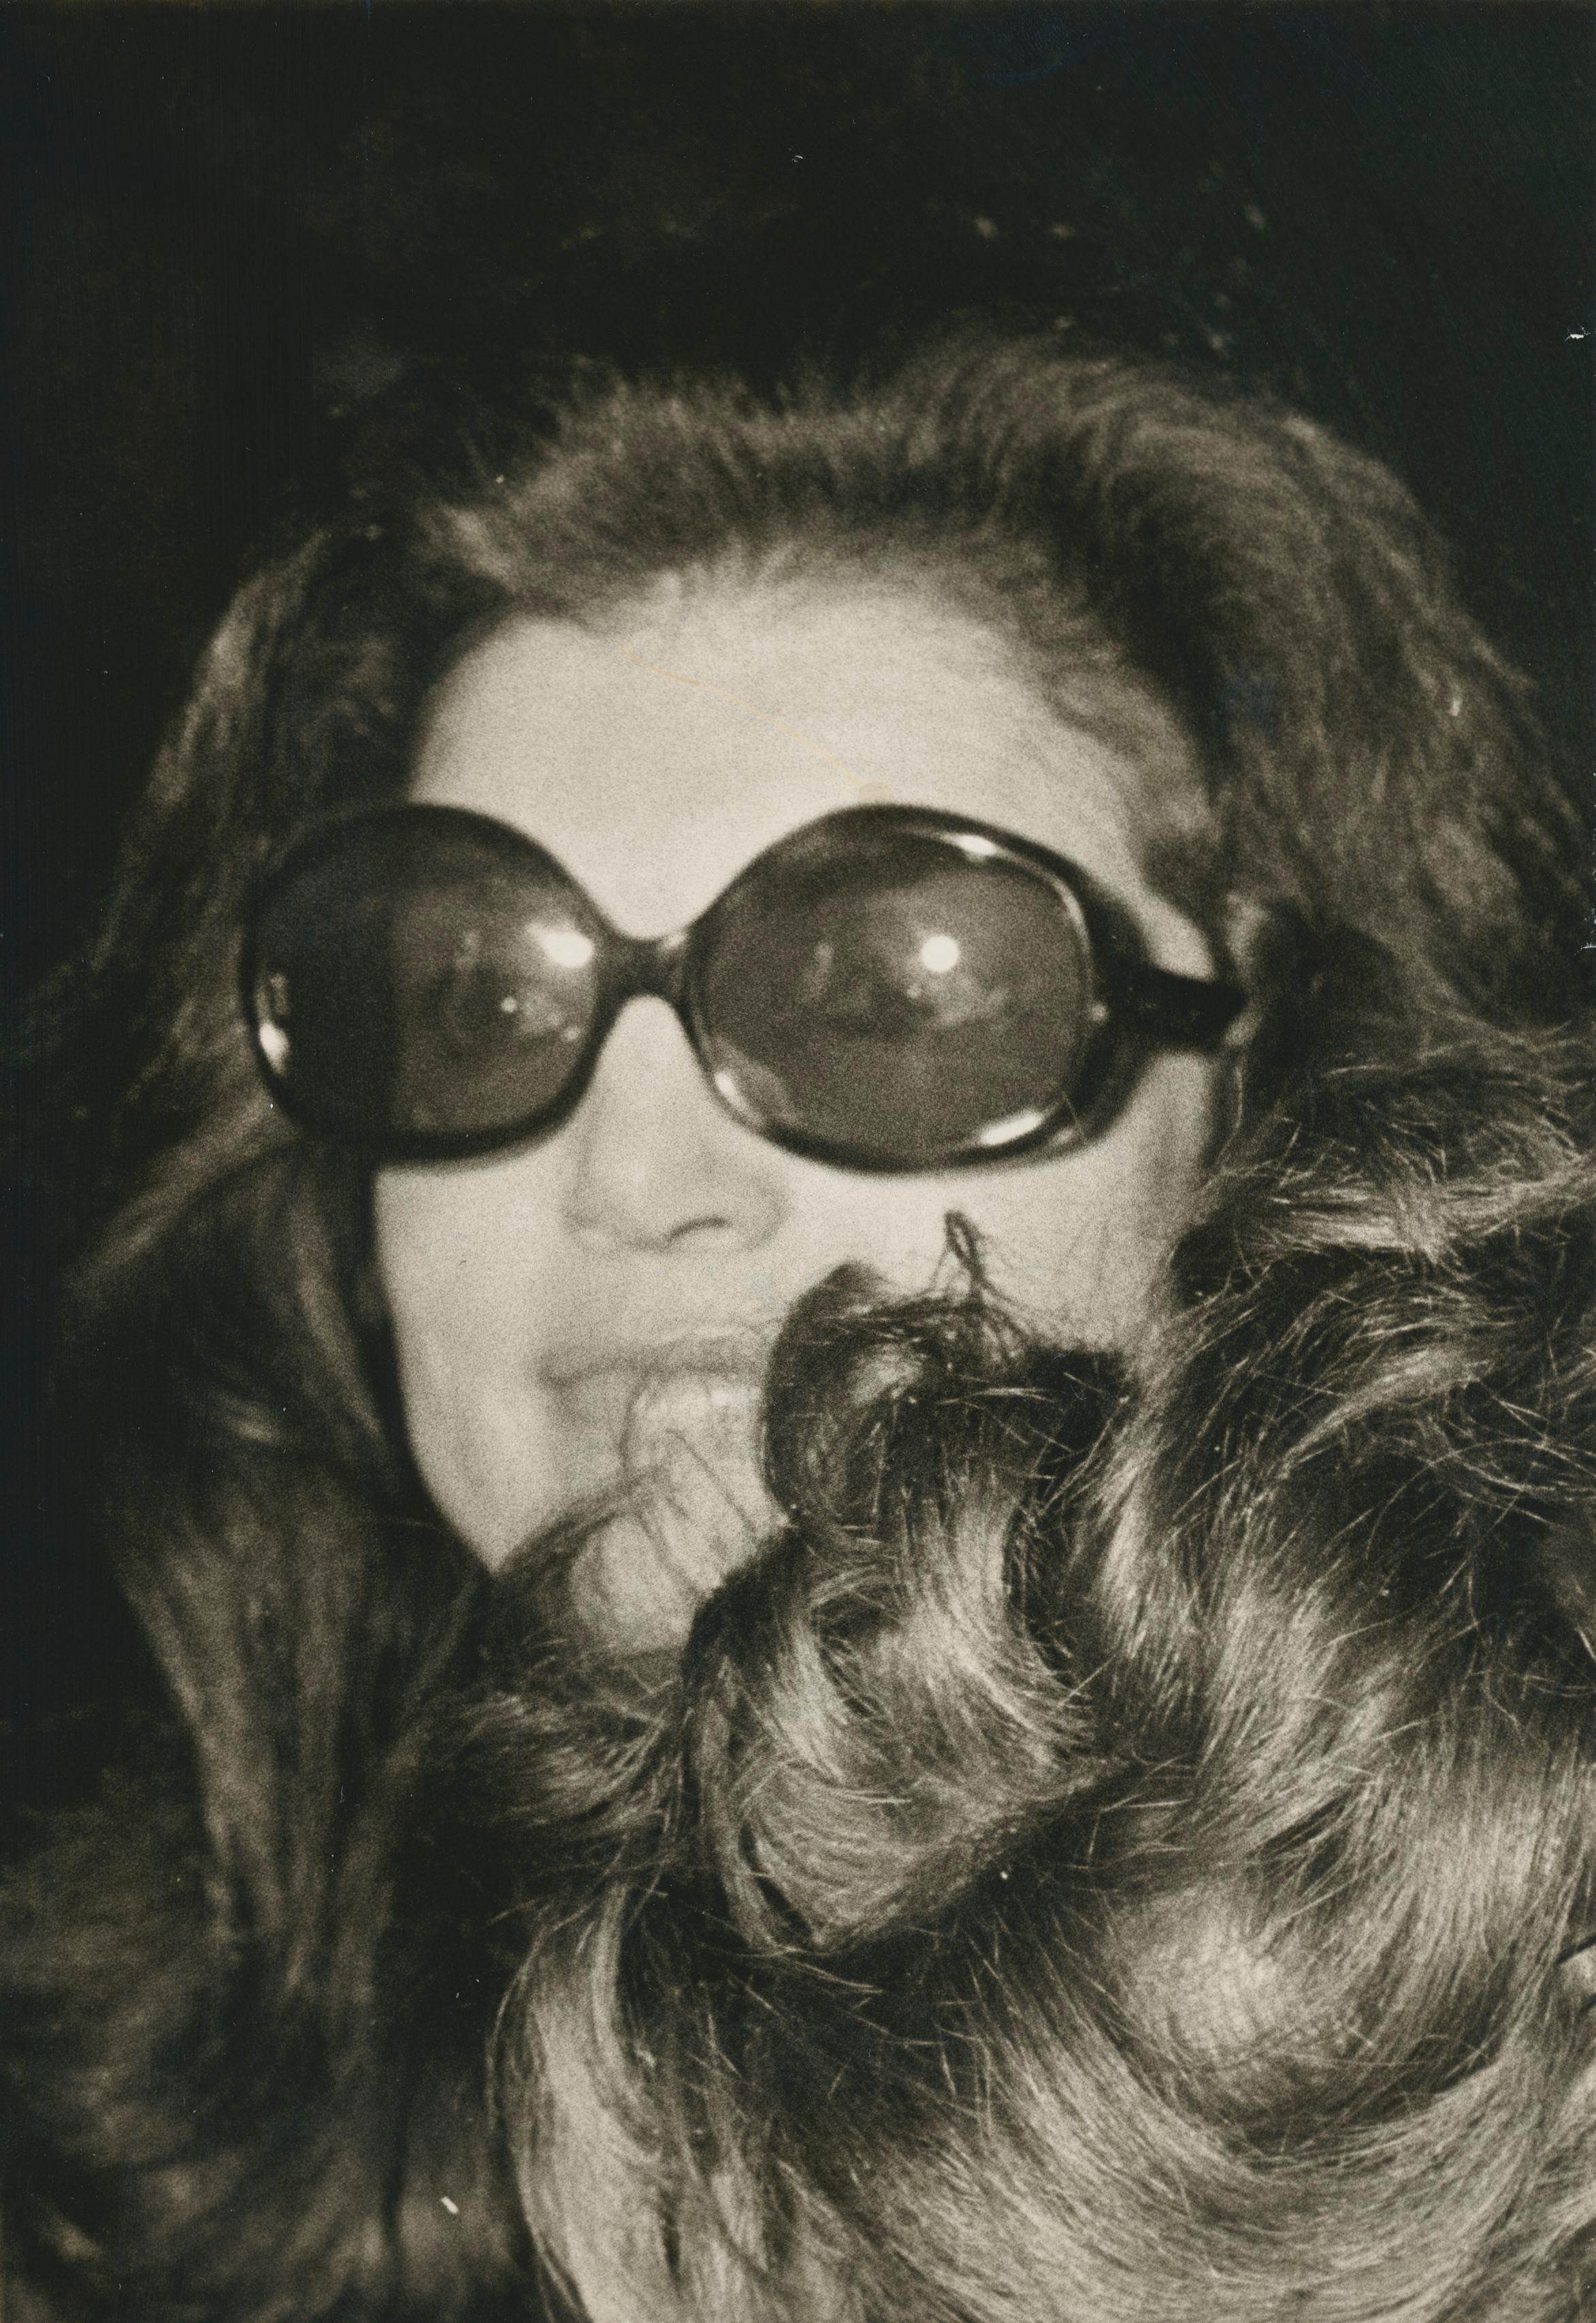 Tony Grylla Black and White Photograph - Jackie Kennedy with Sunglasses, Black and White; Paris, 1970s, 29, 7 x 20, 1 cm